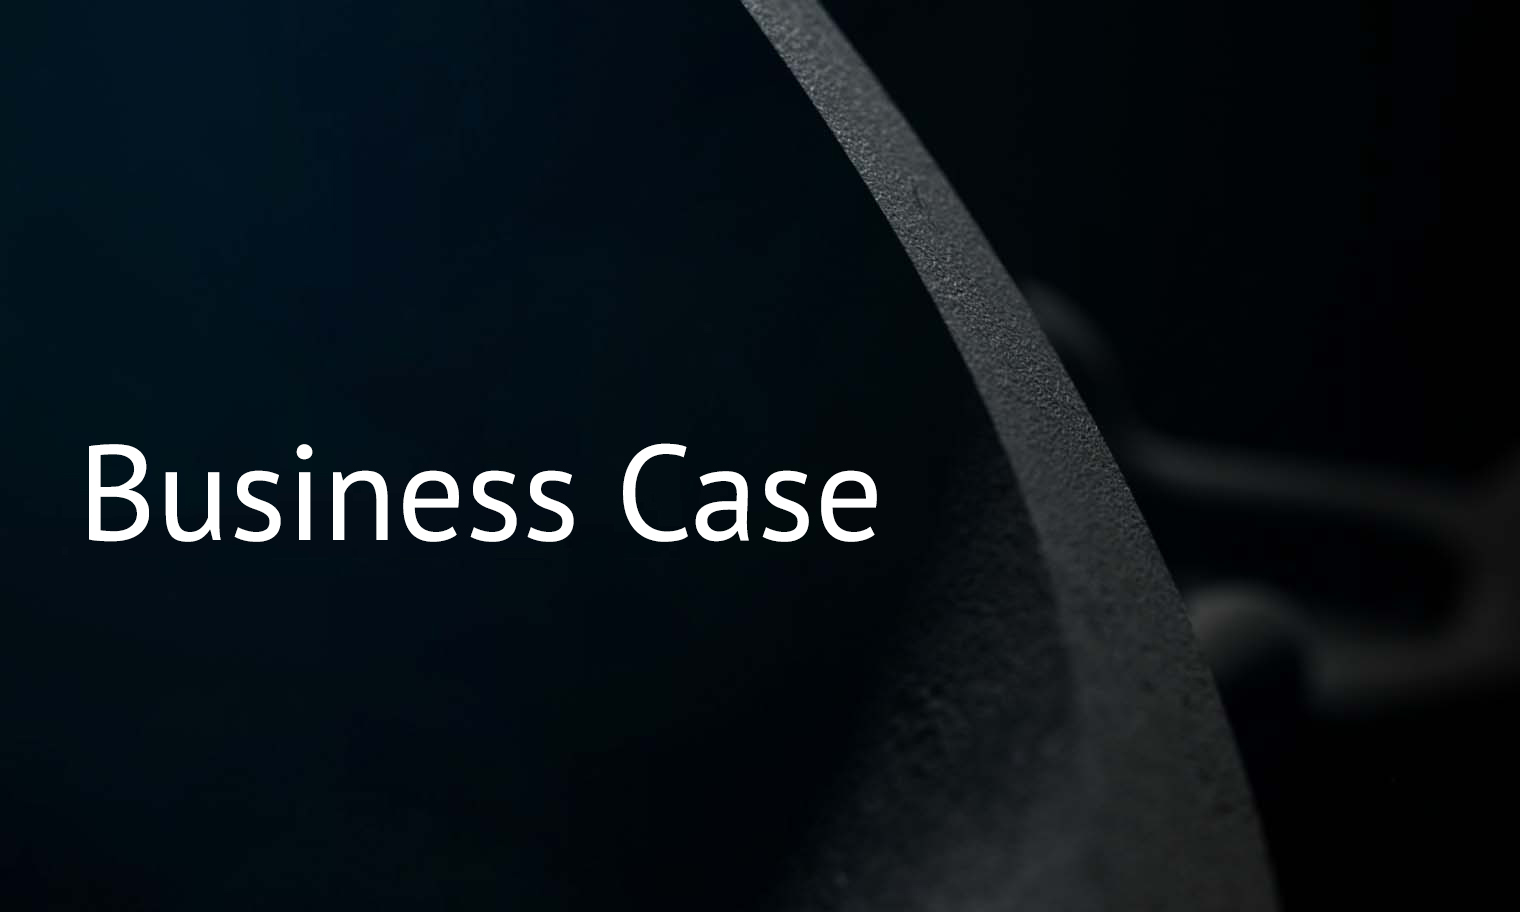 Business Case, our Artificial Intelligence for 3D printing